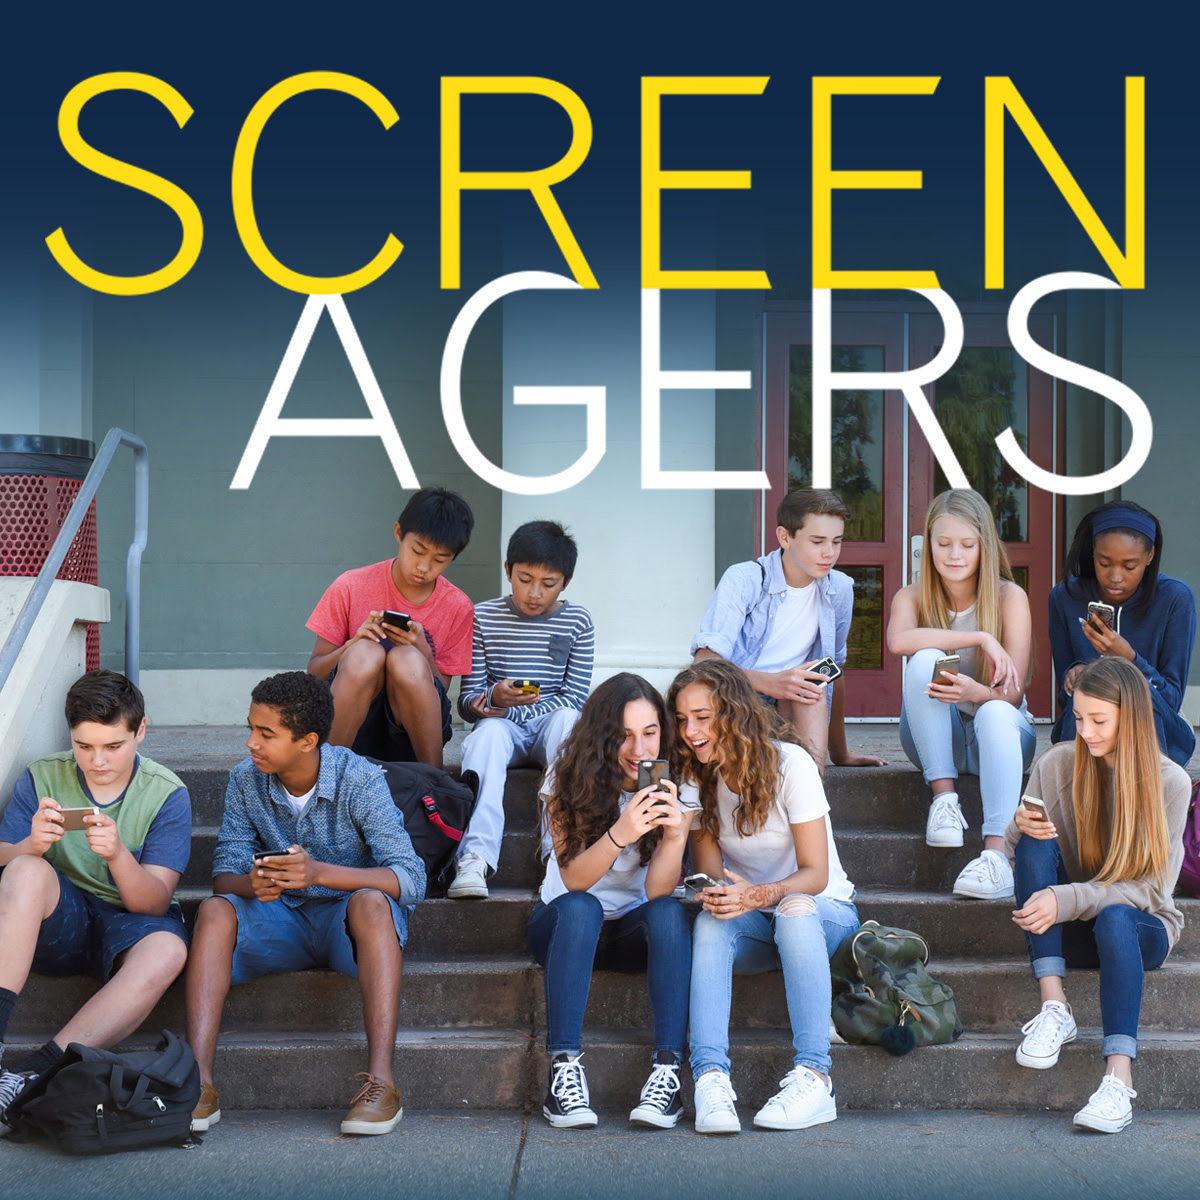 Screenagers Film Presented By Greensboro Academy